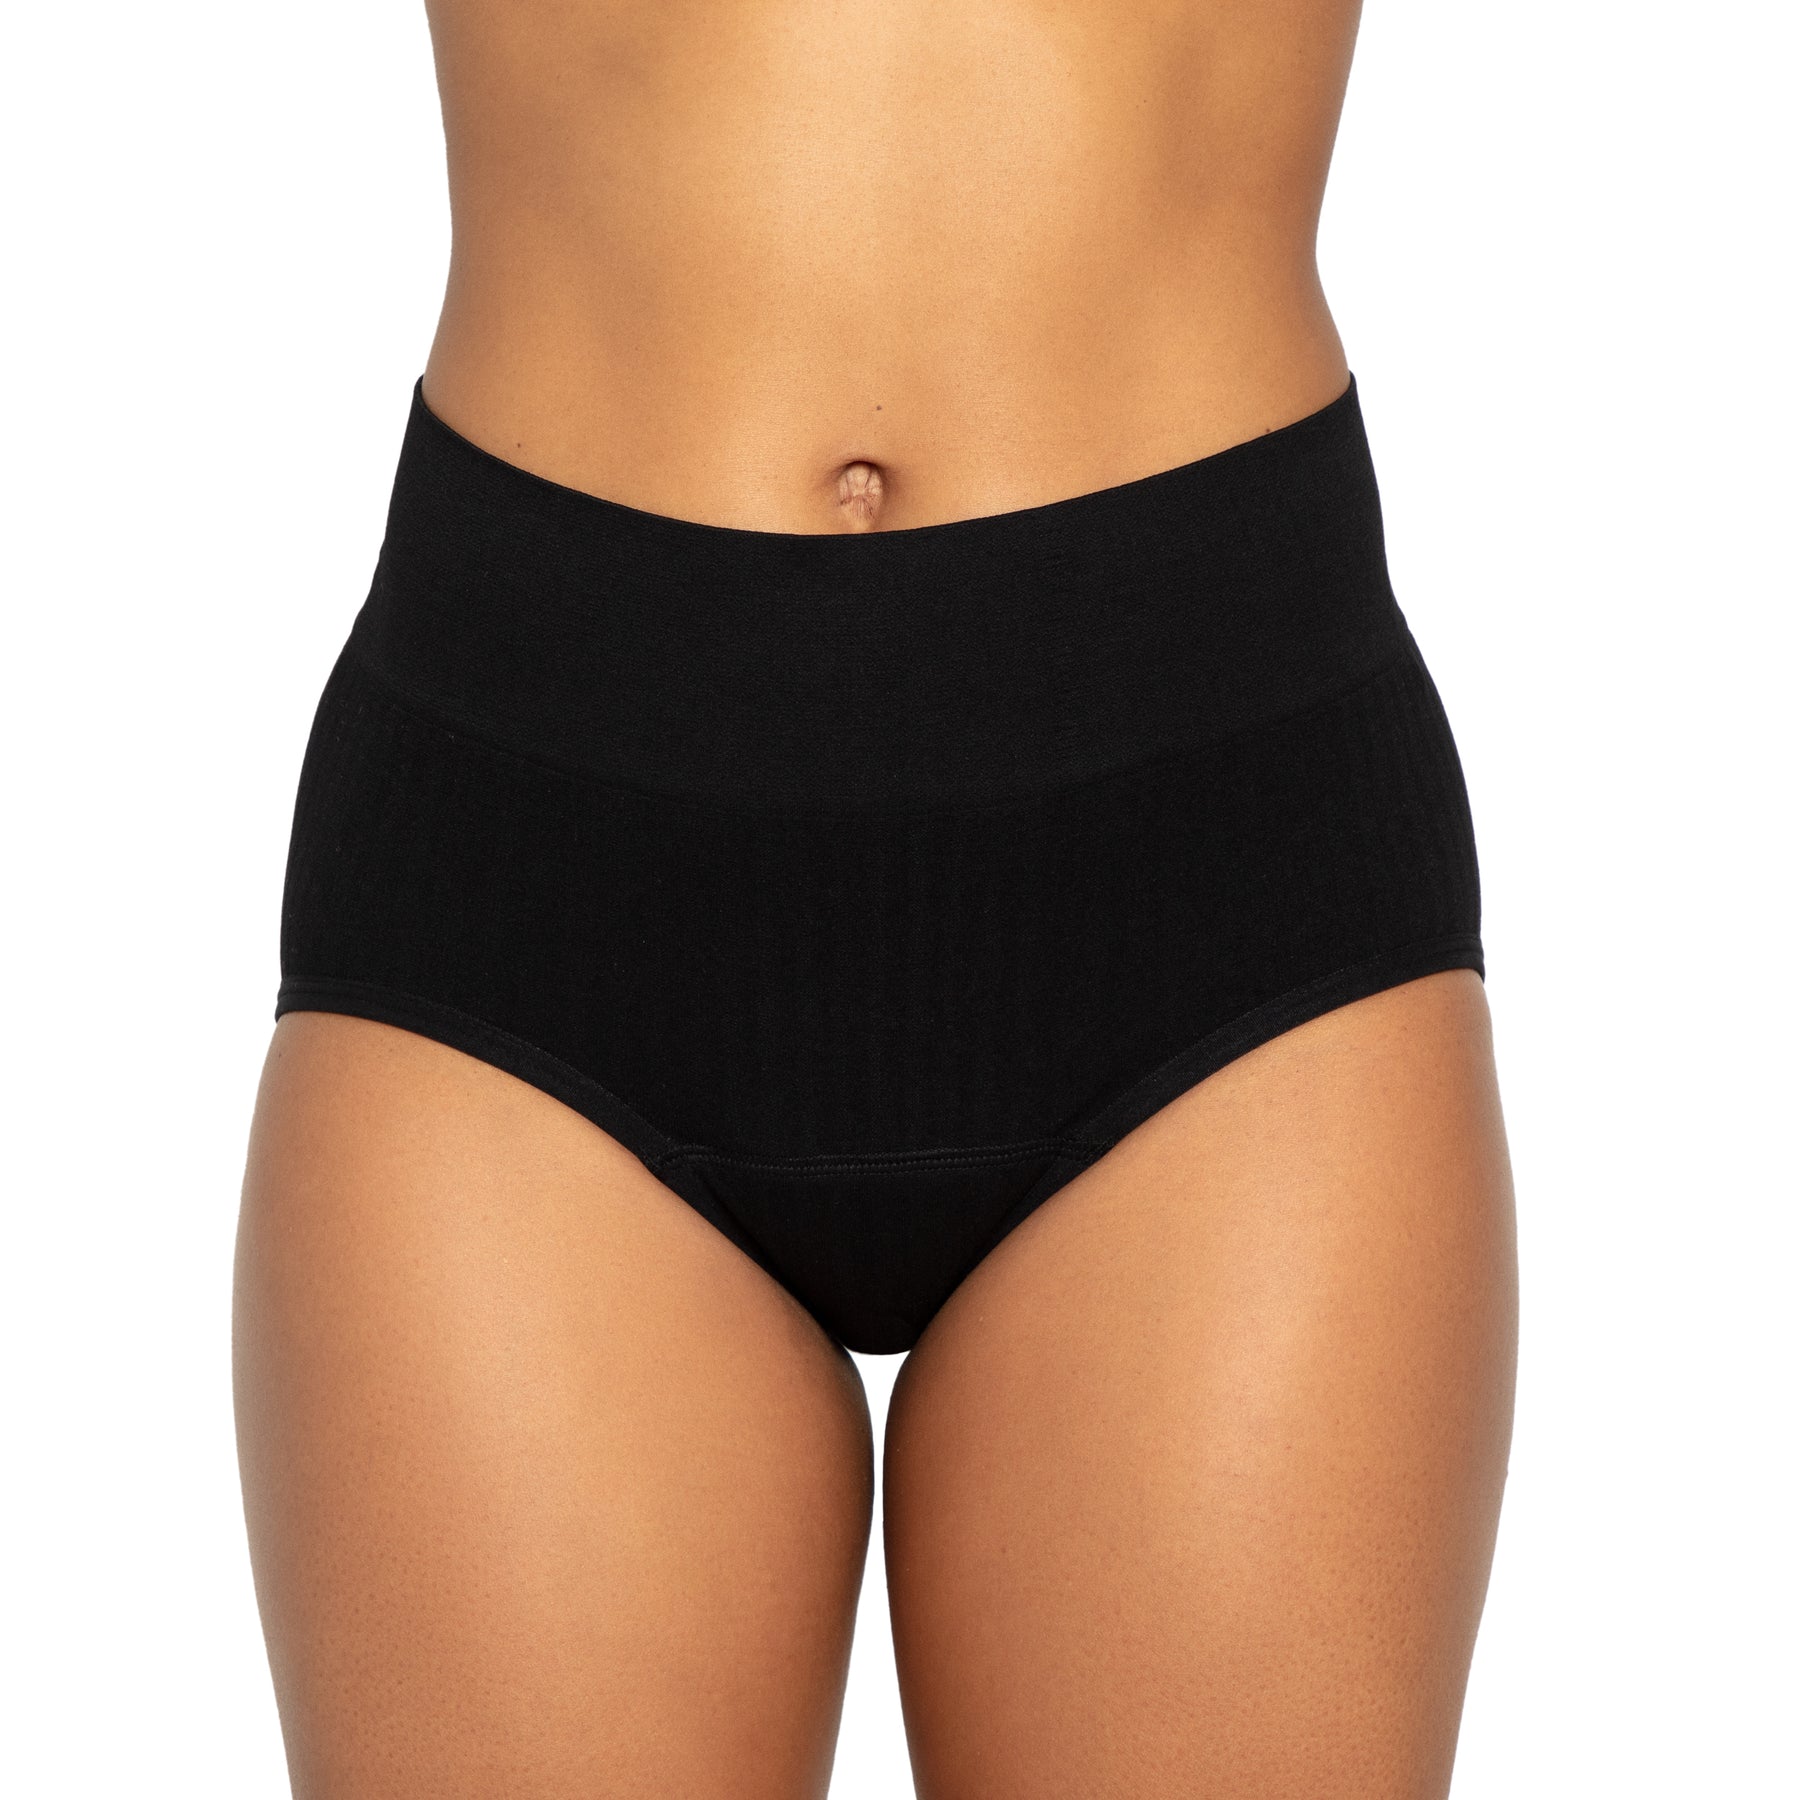 The High Waisted Period. in Sporty Stretch For Heavy Flows – The